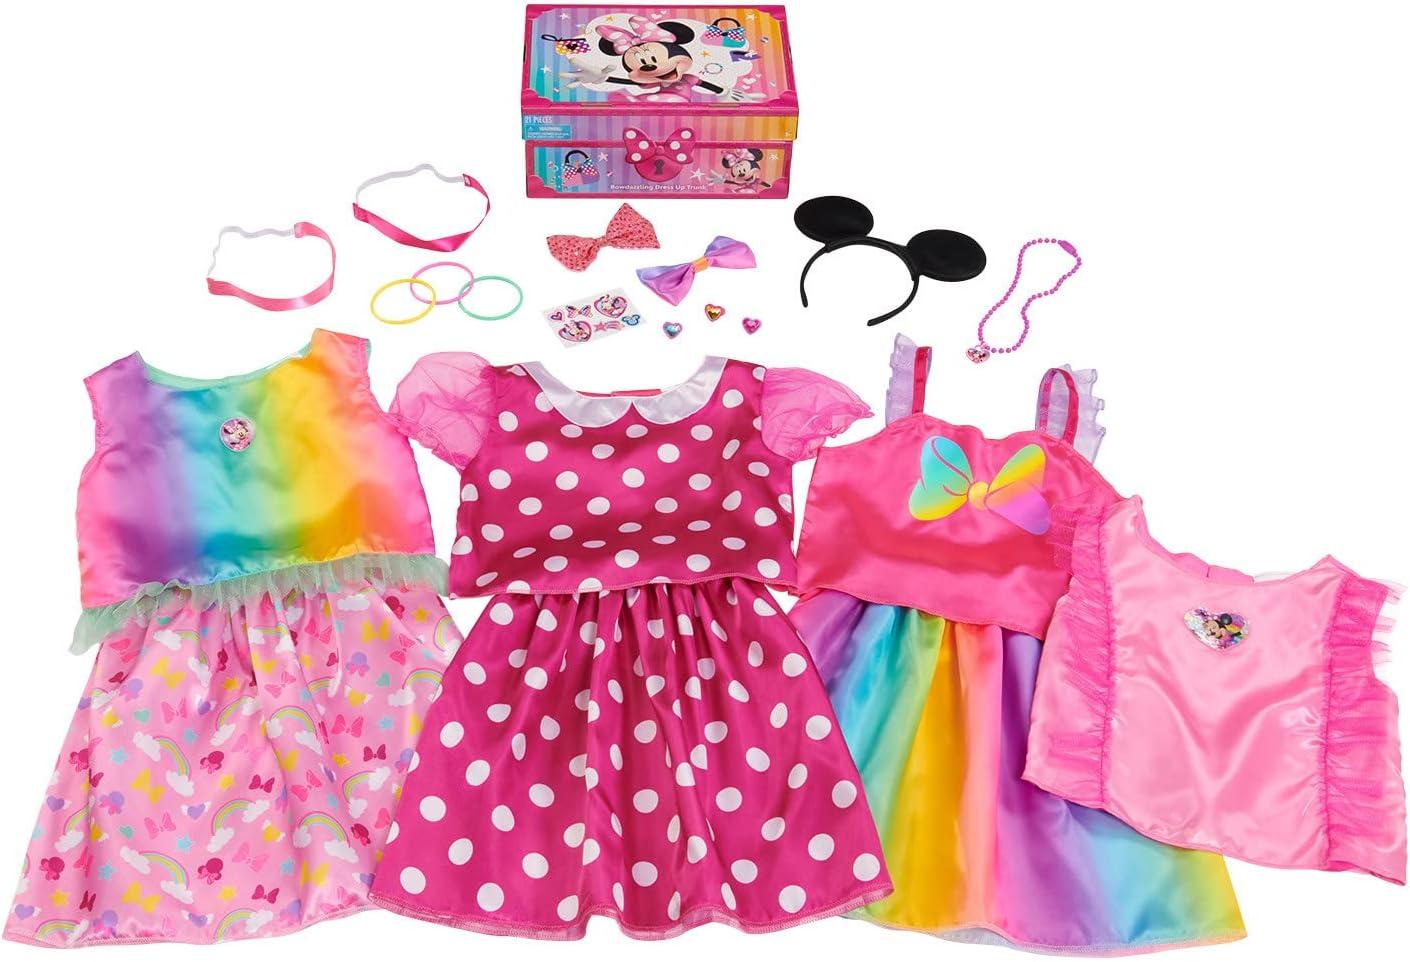 Disney Junior Minnie Mouse Bowdazzling Dress Up Trunk Set for $11.99